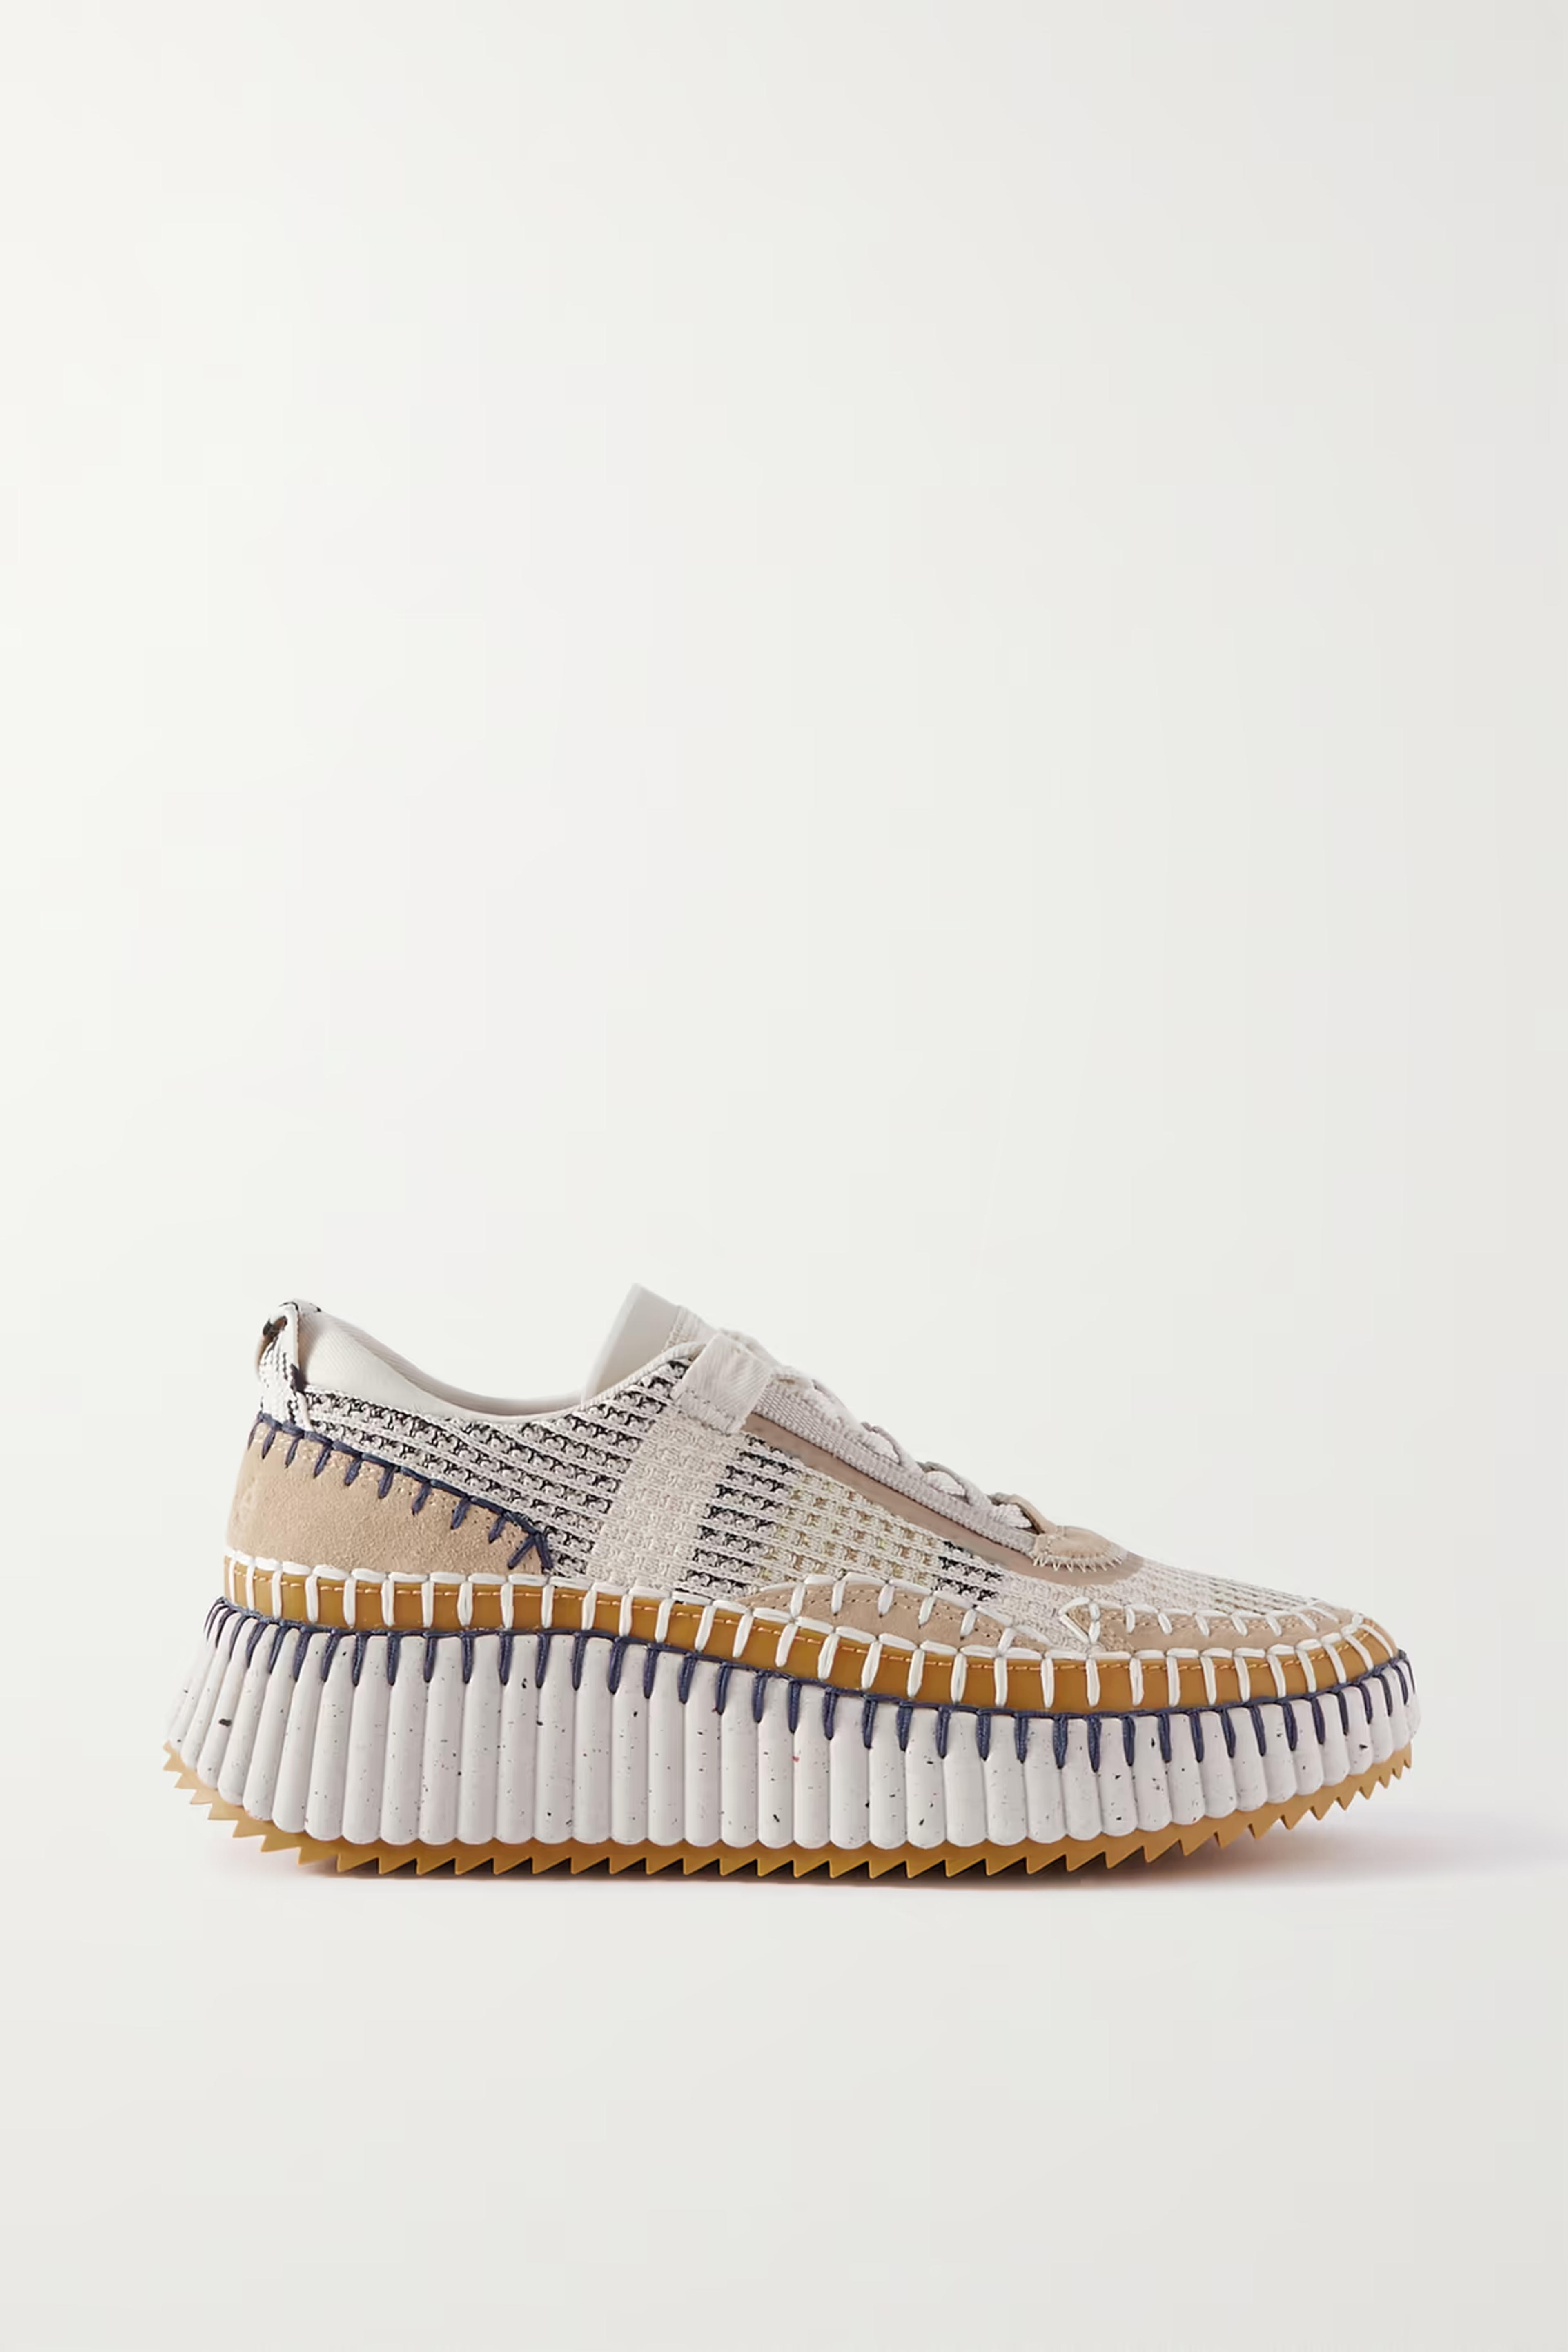 CHLOÉ - Nama embroidered suede and recycled mesh sneakers